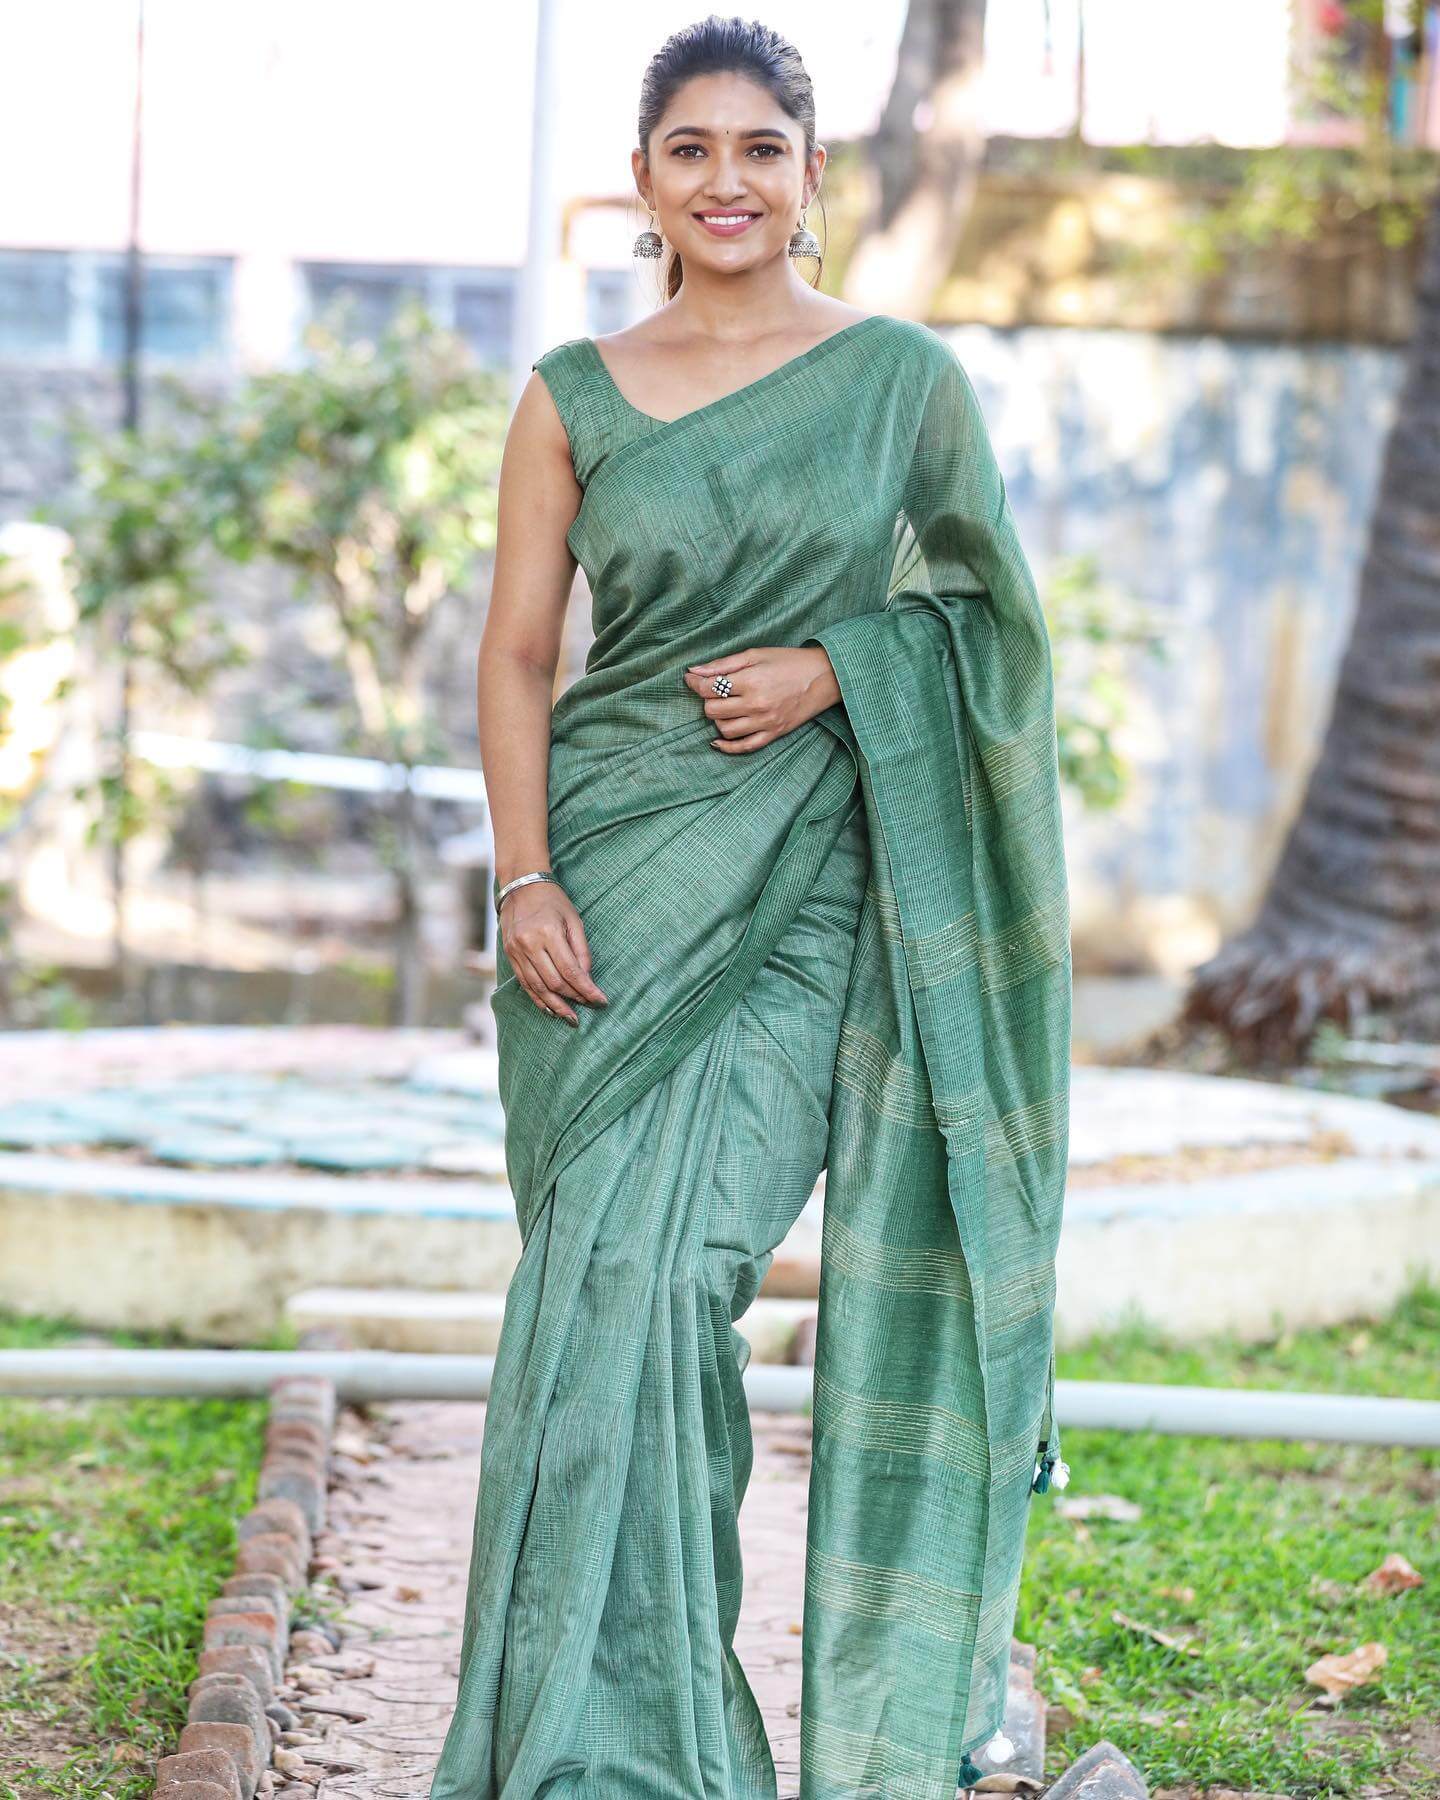 Vani Bhoja Chic & Classy Look In Green Solid Saree With Sleeveless Blouse